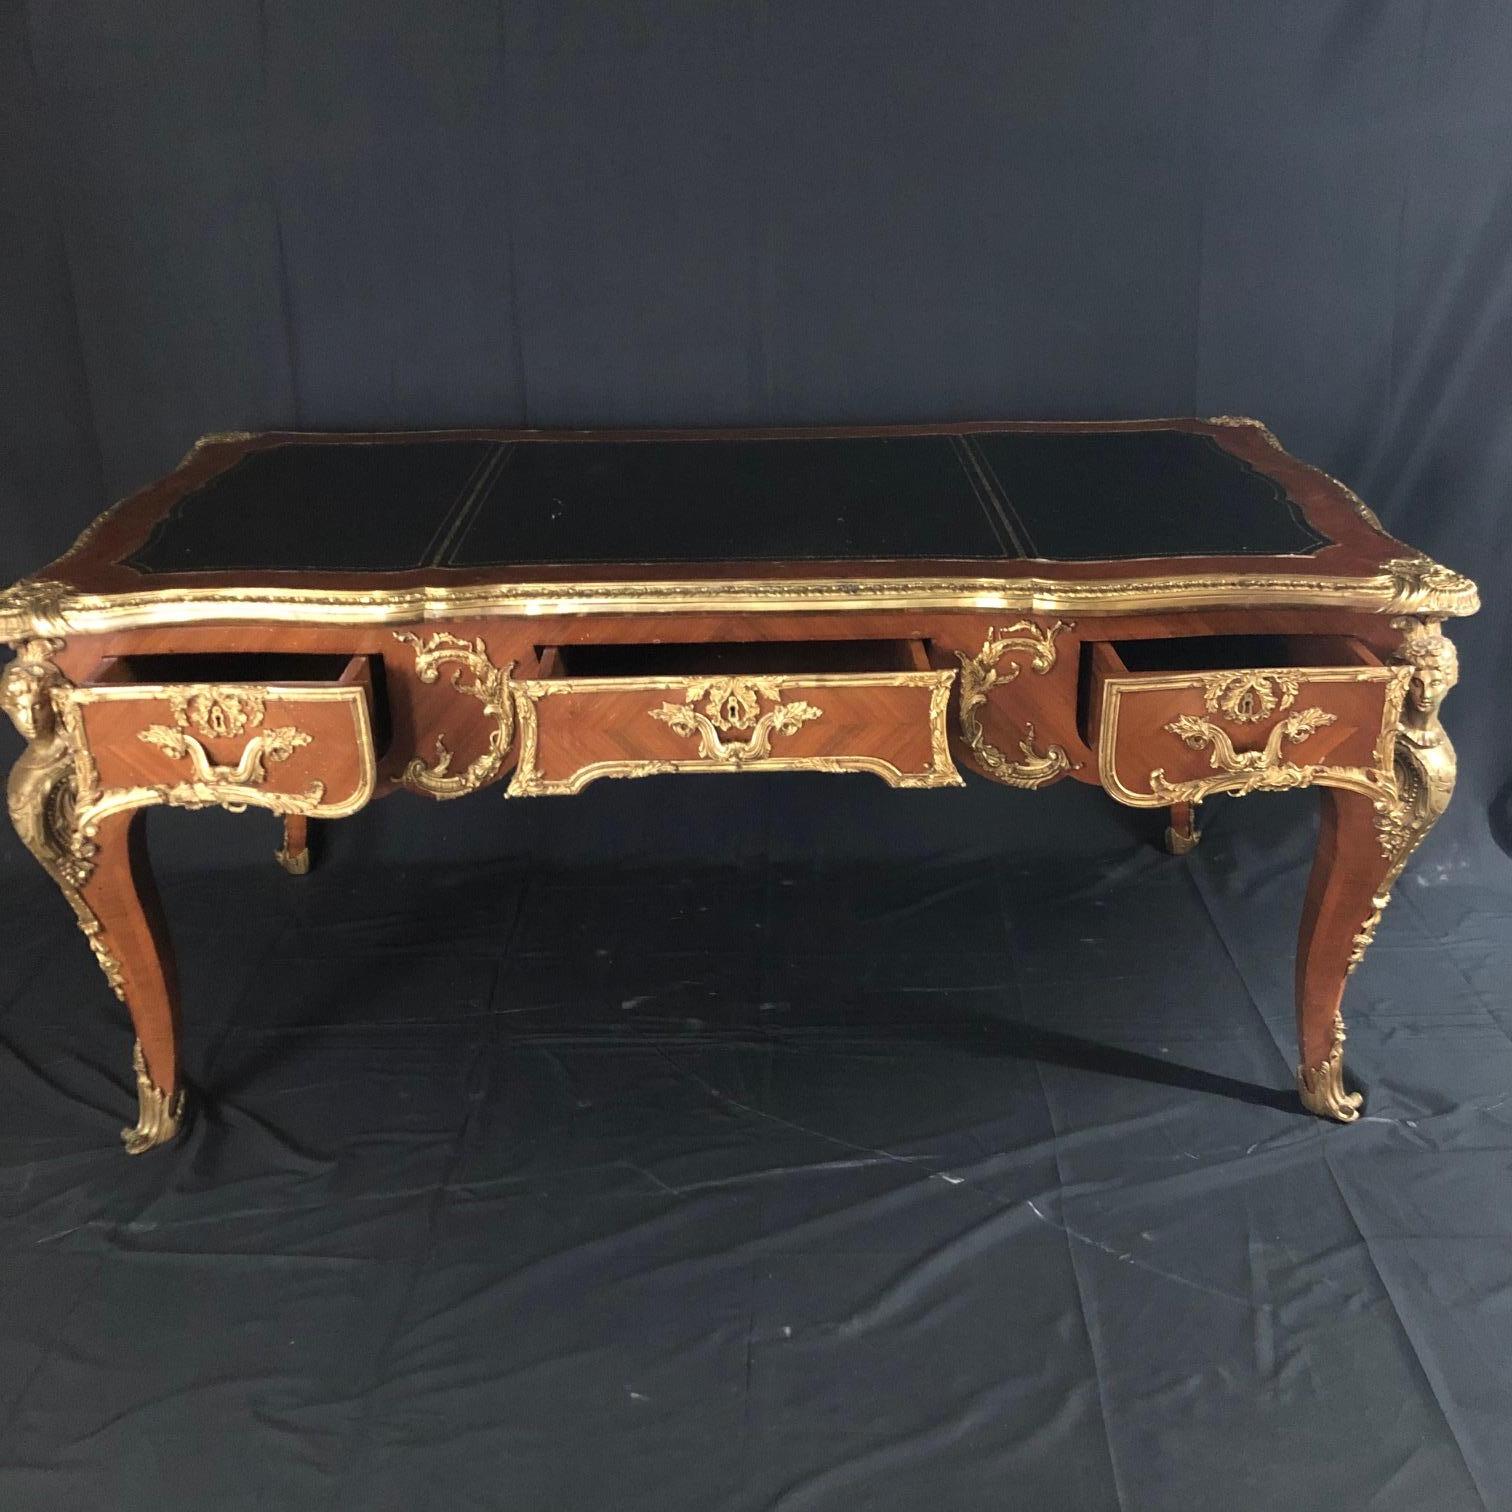 An impressively elegant French Louis XV style walnut and ormolu mounted figural bureau plat desk having herringbone marquetry, rectangular desktop inset with a gilt tooled black leather writing panel, and fitted with three apron drawers with